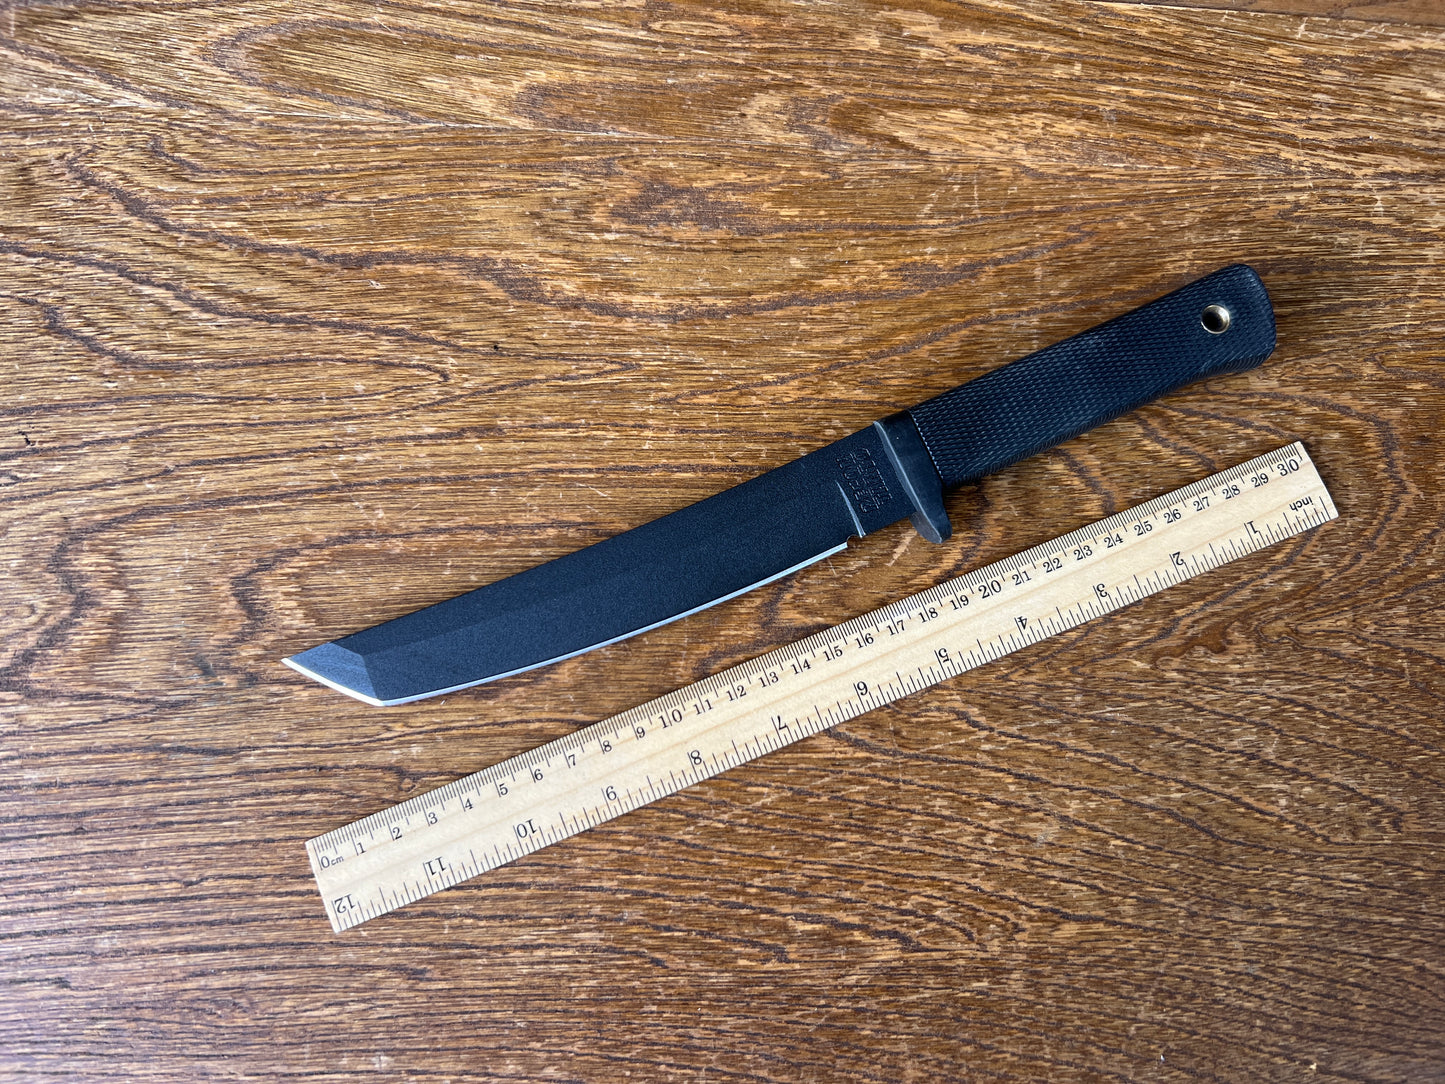 Very early Cold Steel recon ranto carbon V steel produced in the United States